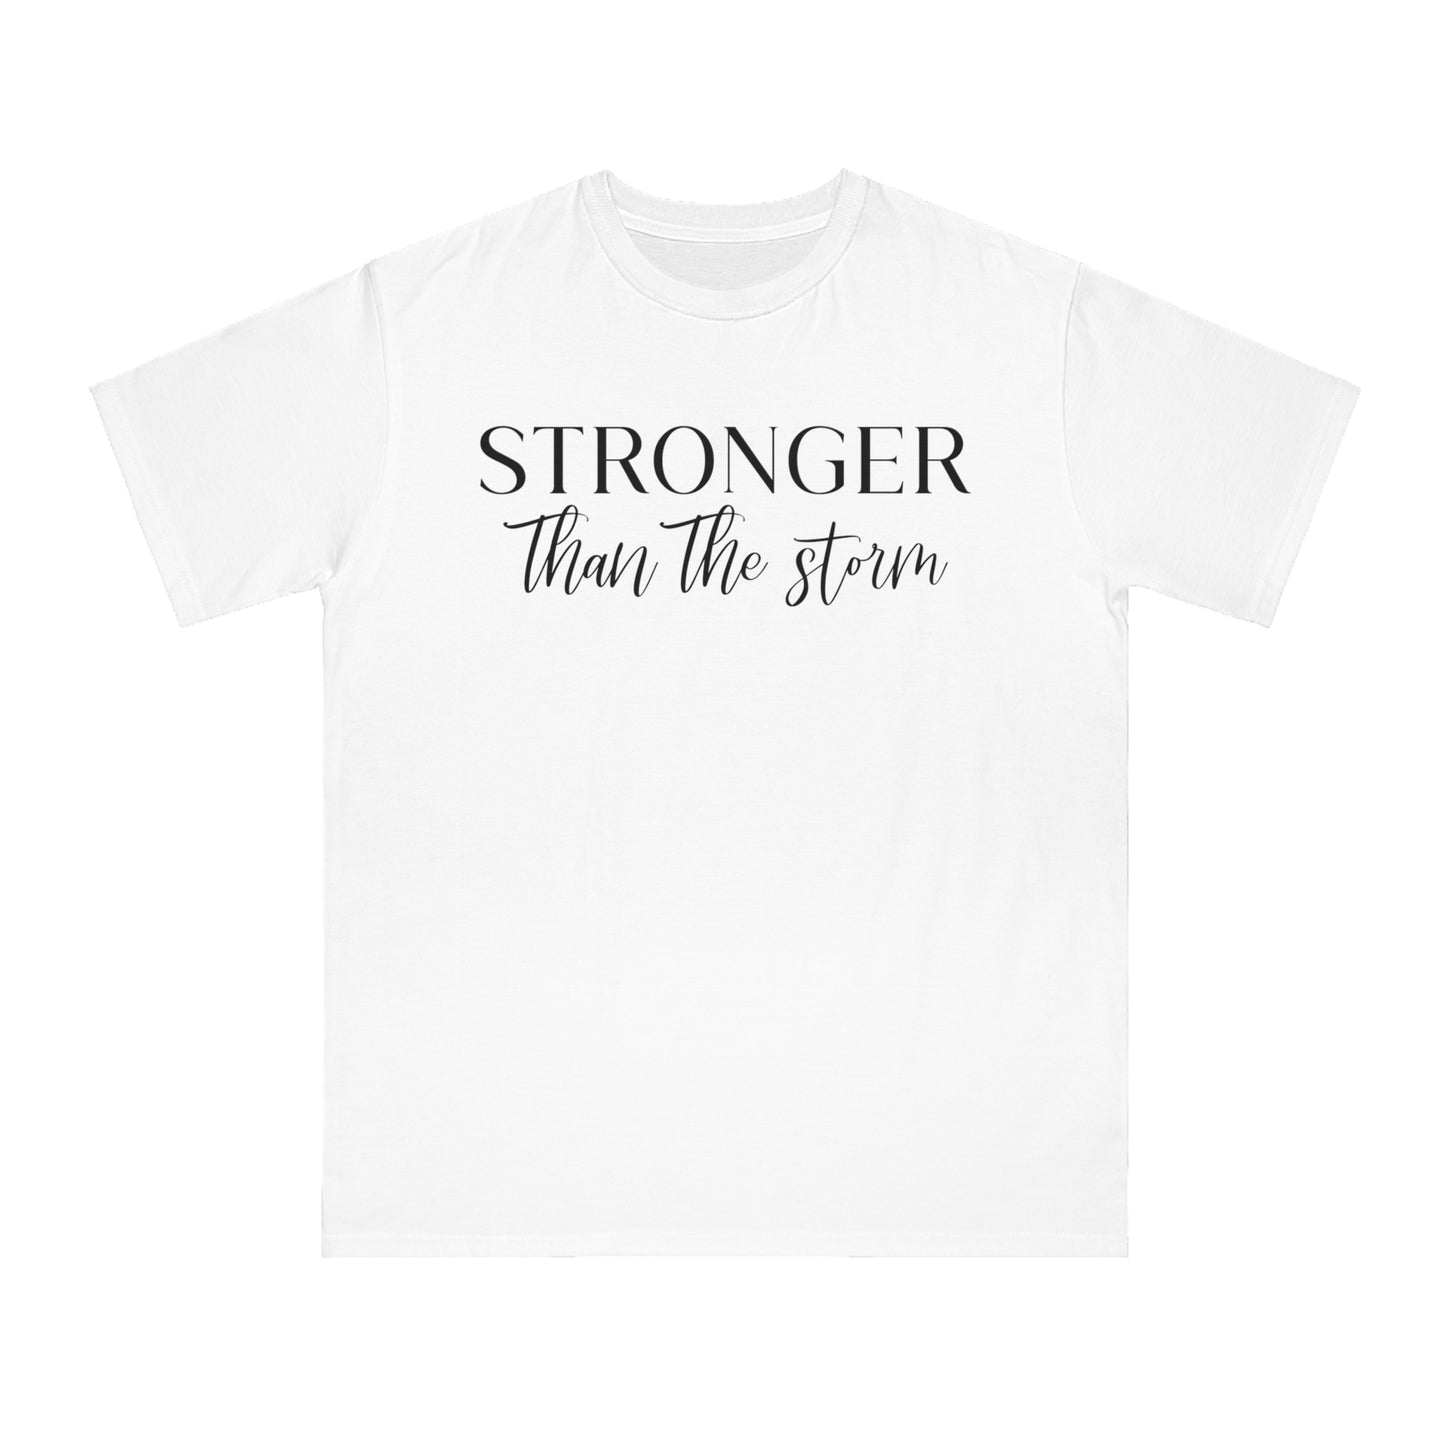 Organic Unisex Stronger Than The Storm T-Shirt - The Oracle Alchemist